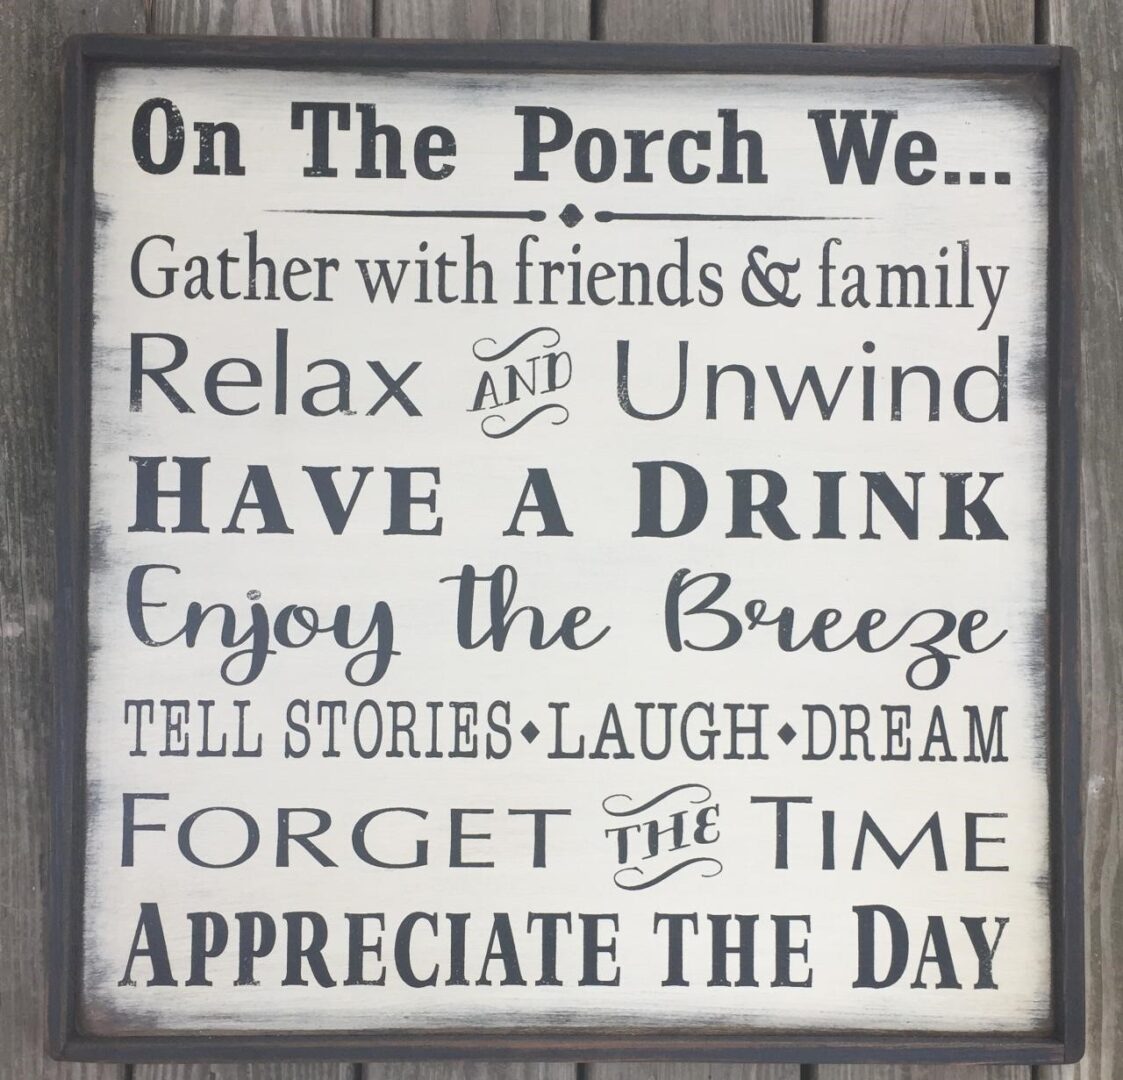 25 inch by 25 inch wood sign reads On the porch we gather with friends and family, relax and unwind, have a drink, enjoy the breeze, tell stories, laugh, dream, forget the time, appreciate the day. 